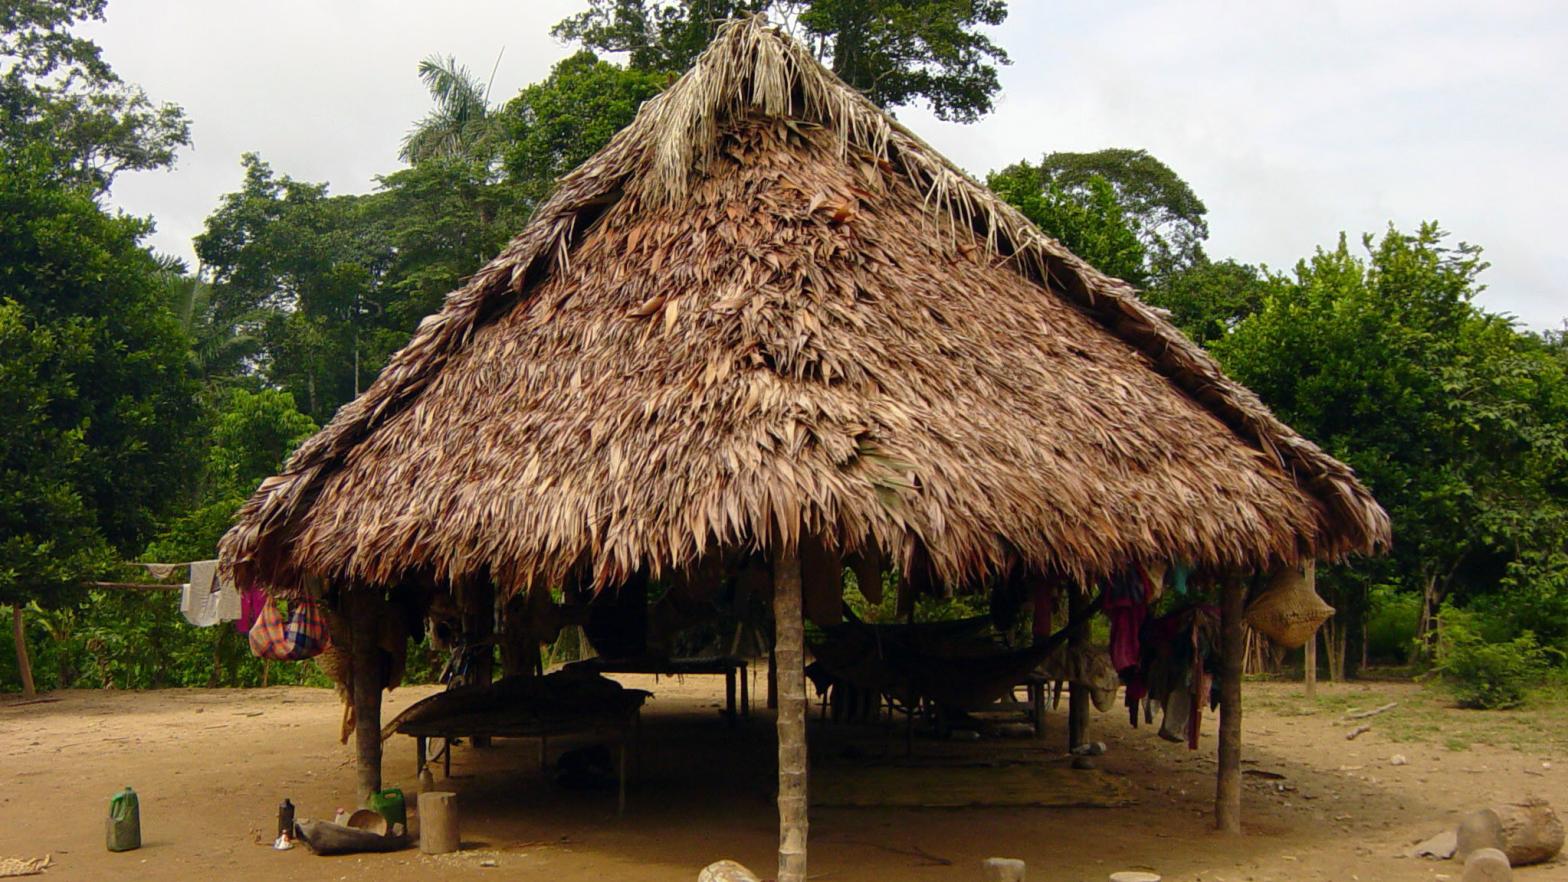 A dwelling of the Tsimane, a group of indigenous people who live in the rural tropics of Bolivia in South America.  (Photo: Michael Gurven/St. Luke’s Health System Kansas City , AP)